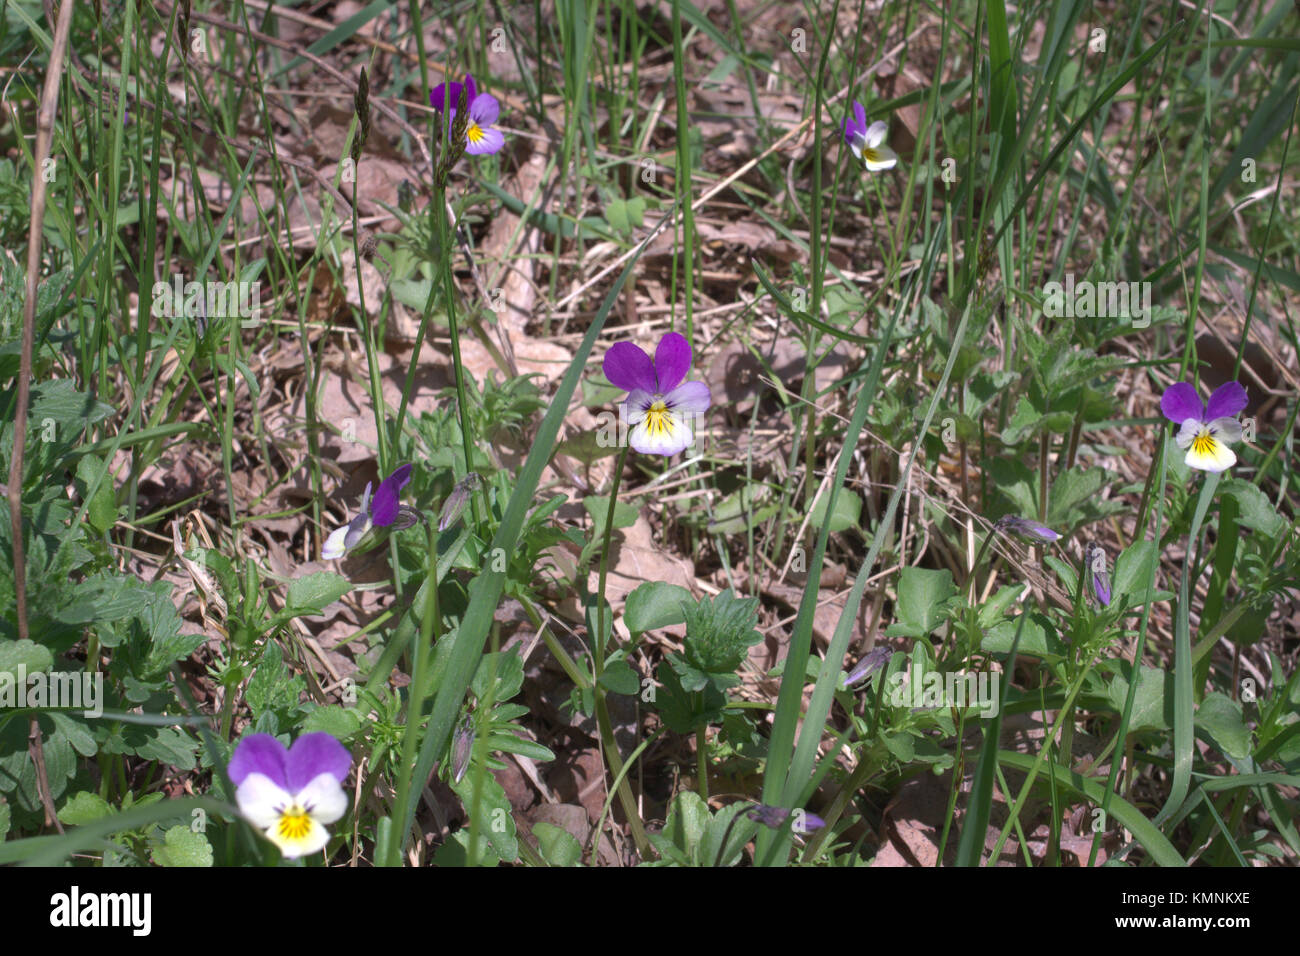 Viola tricolor purple flower among the withered leaves Stock Photo